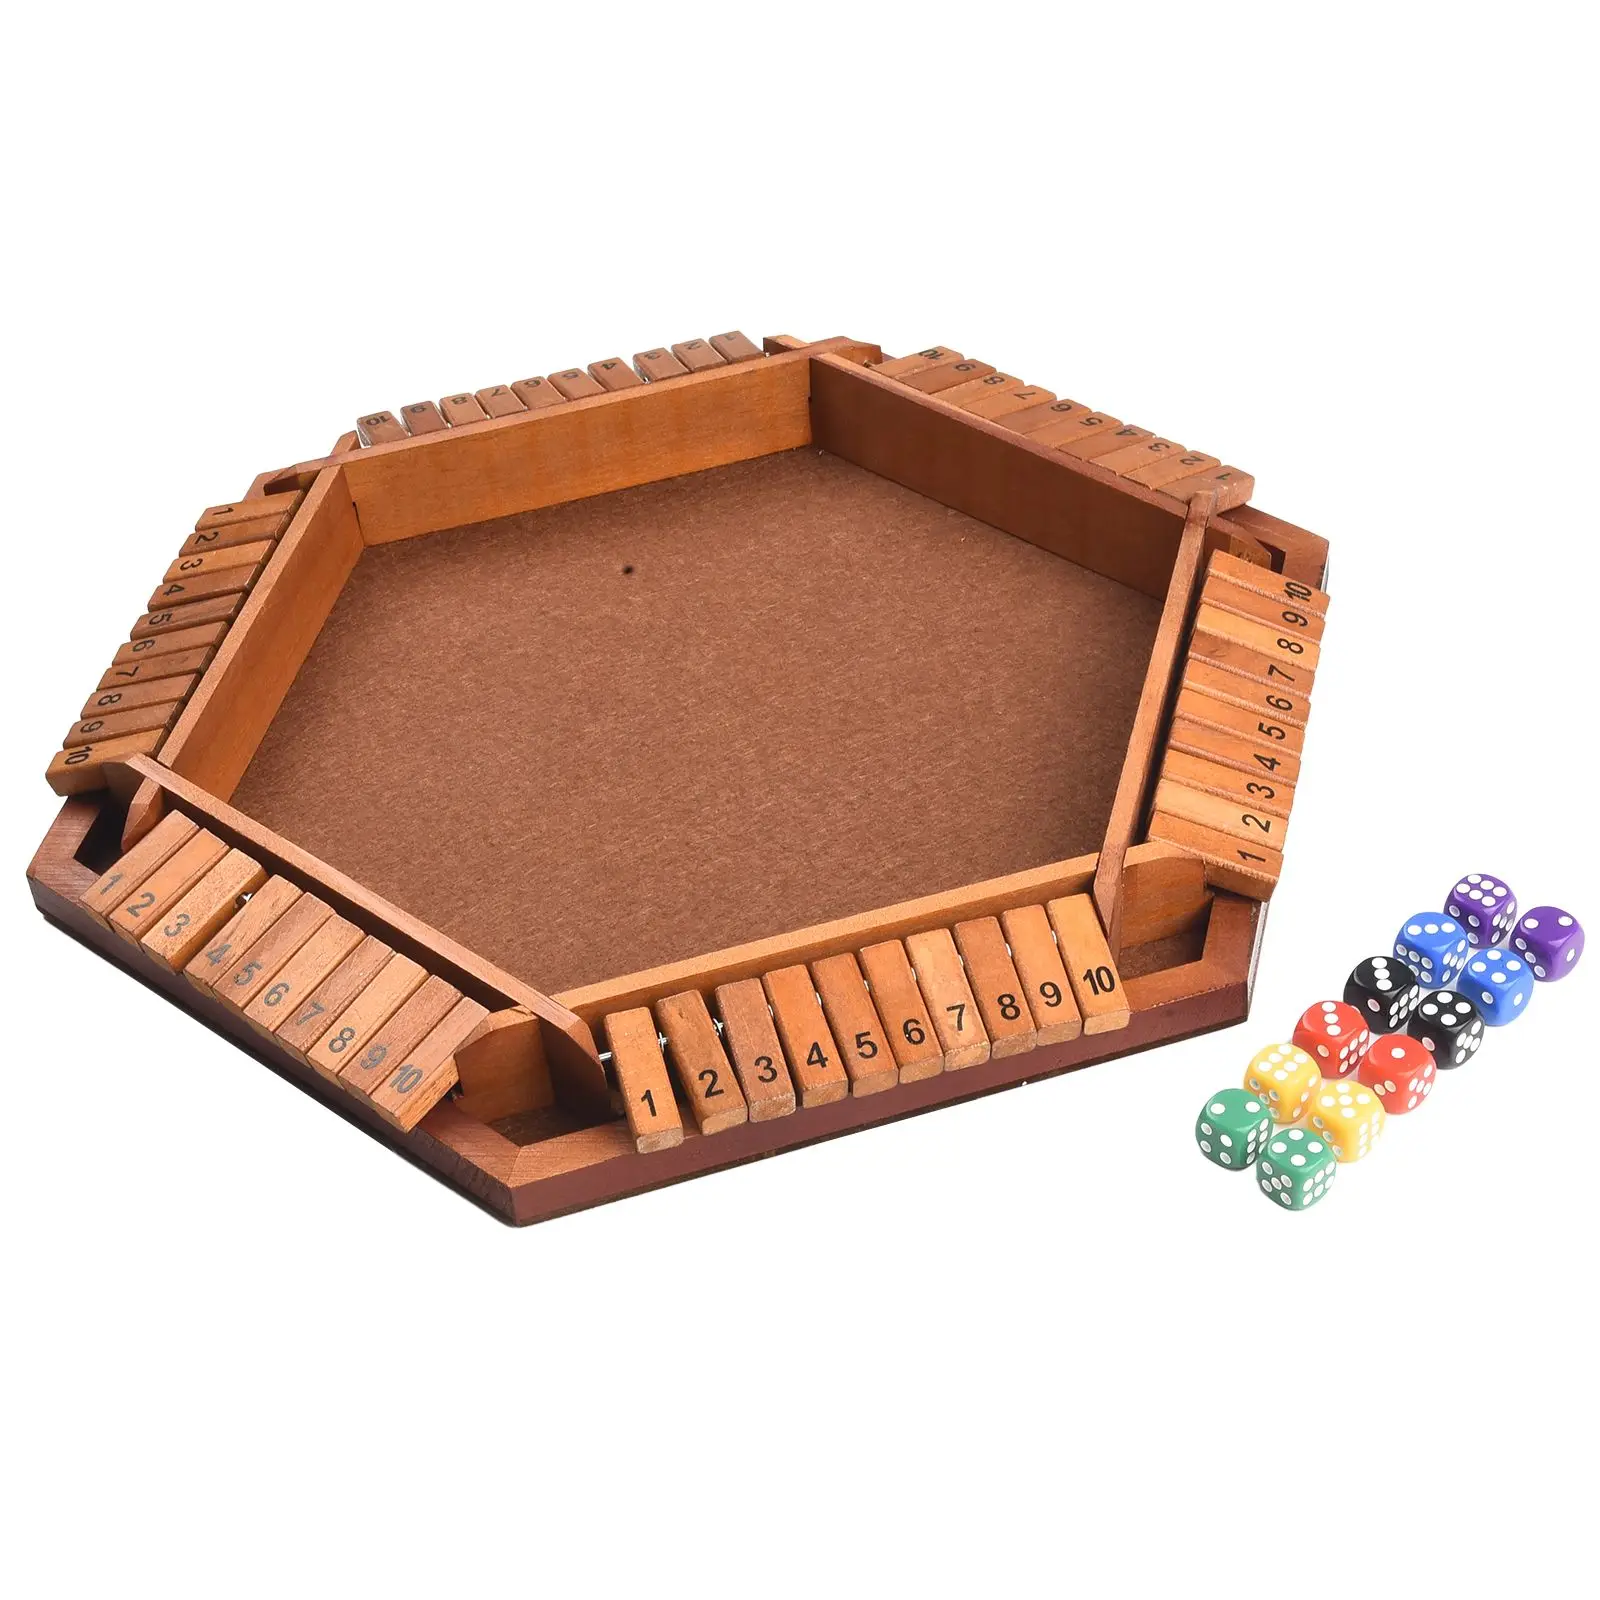 

Dice Game Shut The Box Table Math Game Tabletop With 16 Dice Wooden Board Classroom Family For Kids Adults Brand New